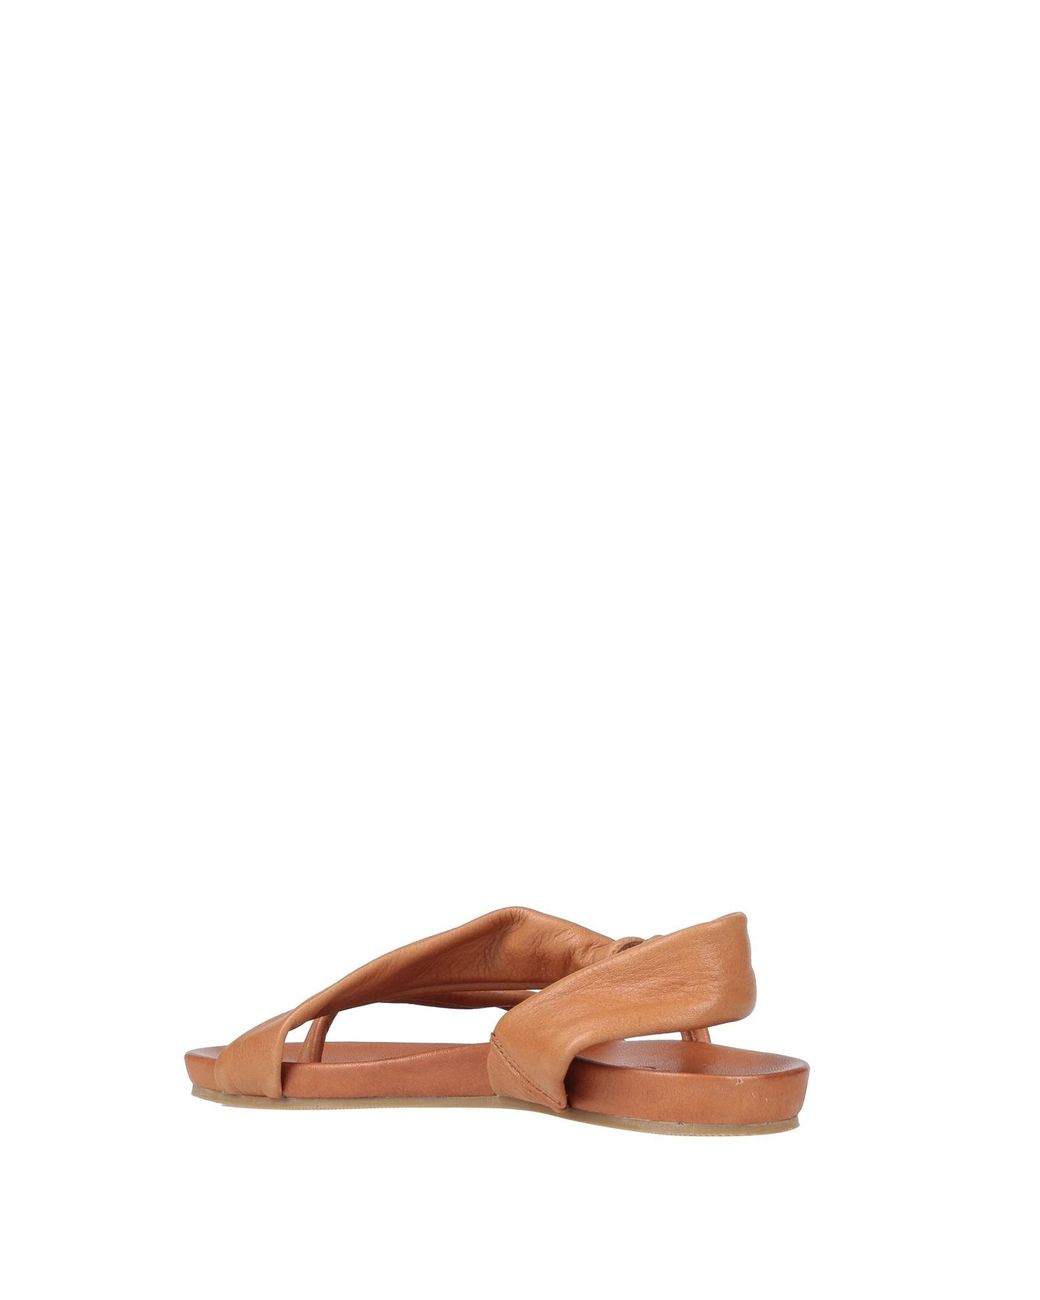 Inuovo Leather Toe Post Sandals in Tan (Natural) | Lyst